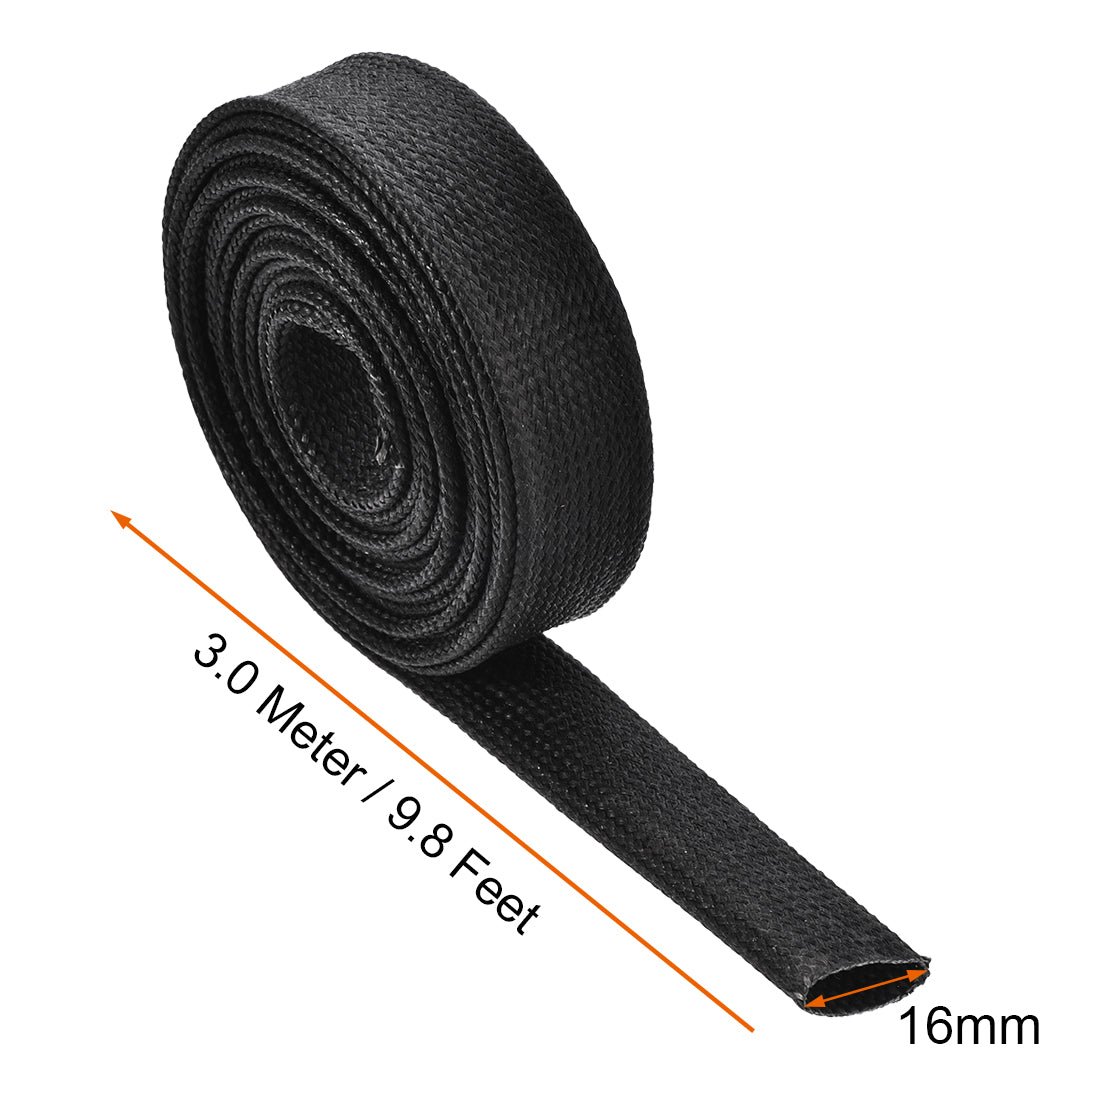 uxcell Uxcell Insulation Cable Protector,9.8Ft-16mm High TEMP Silicone Fiberglass Sleeve Black